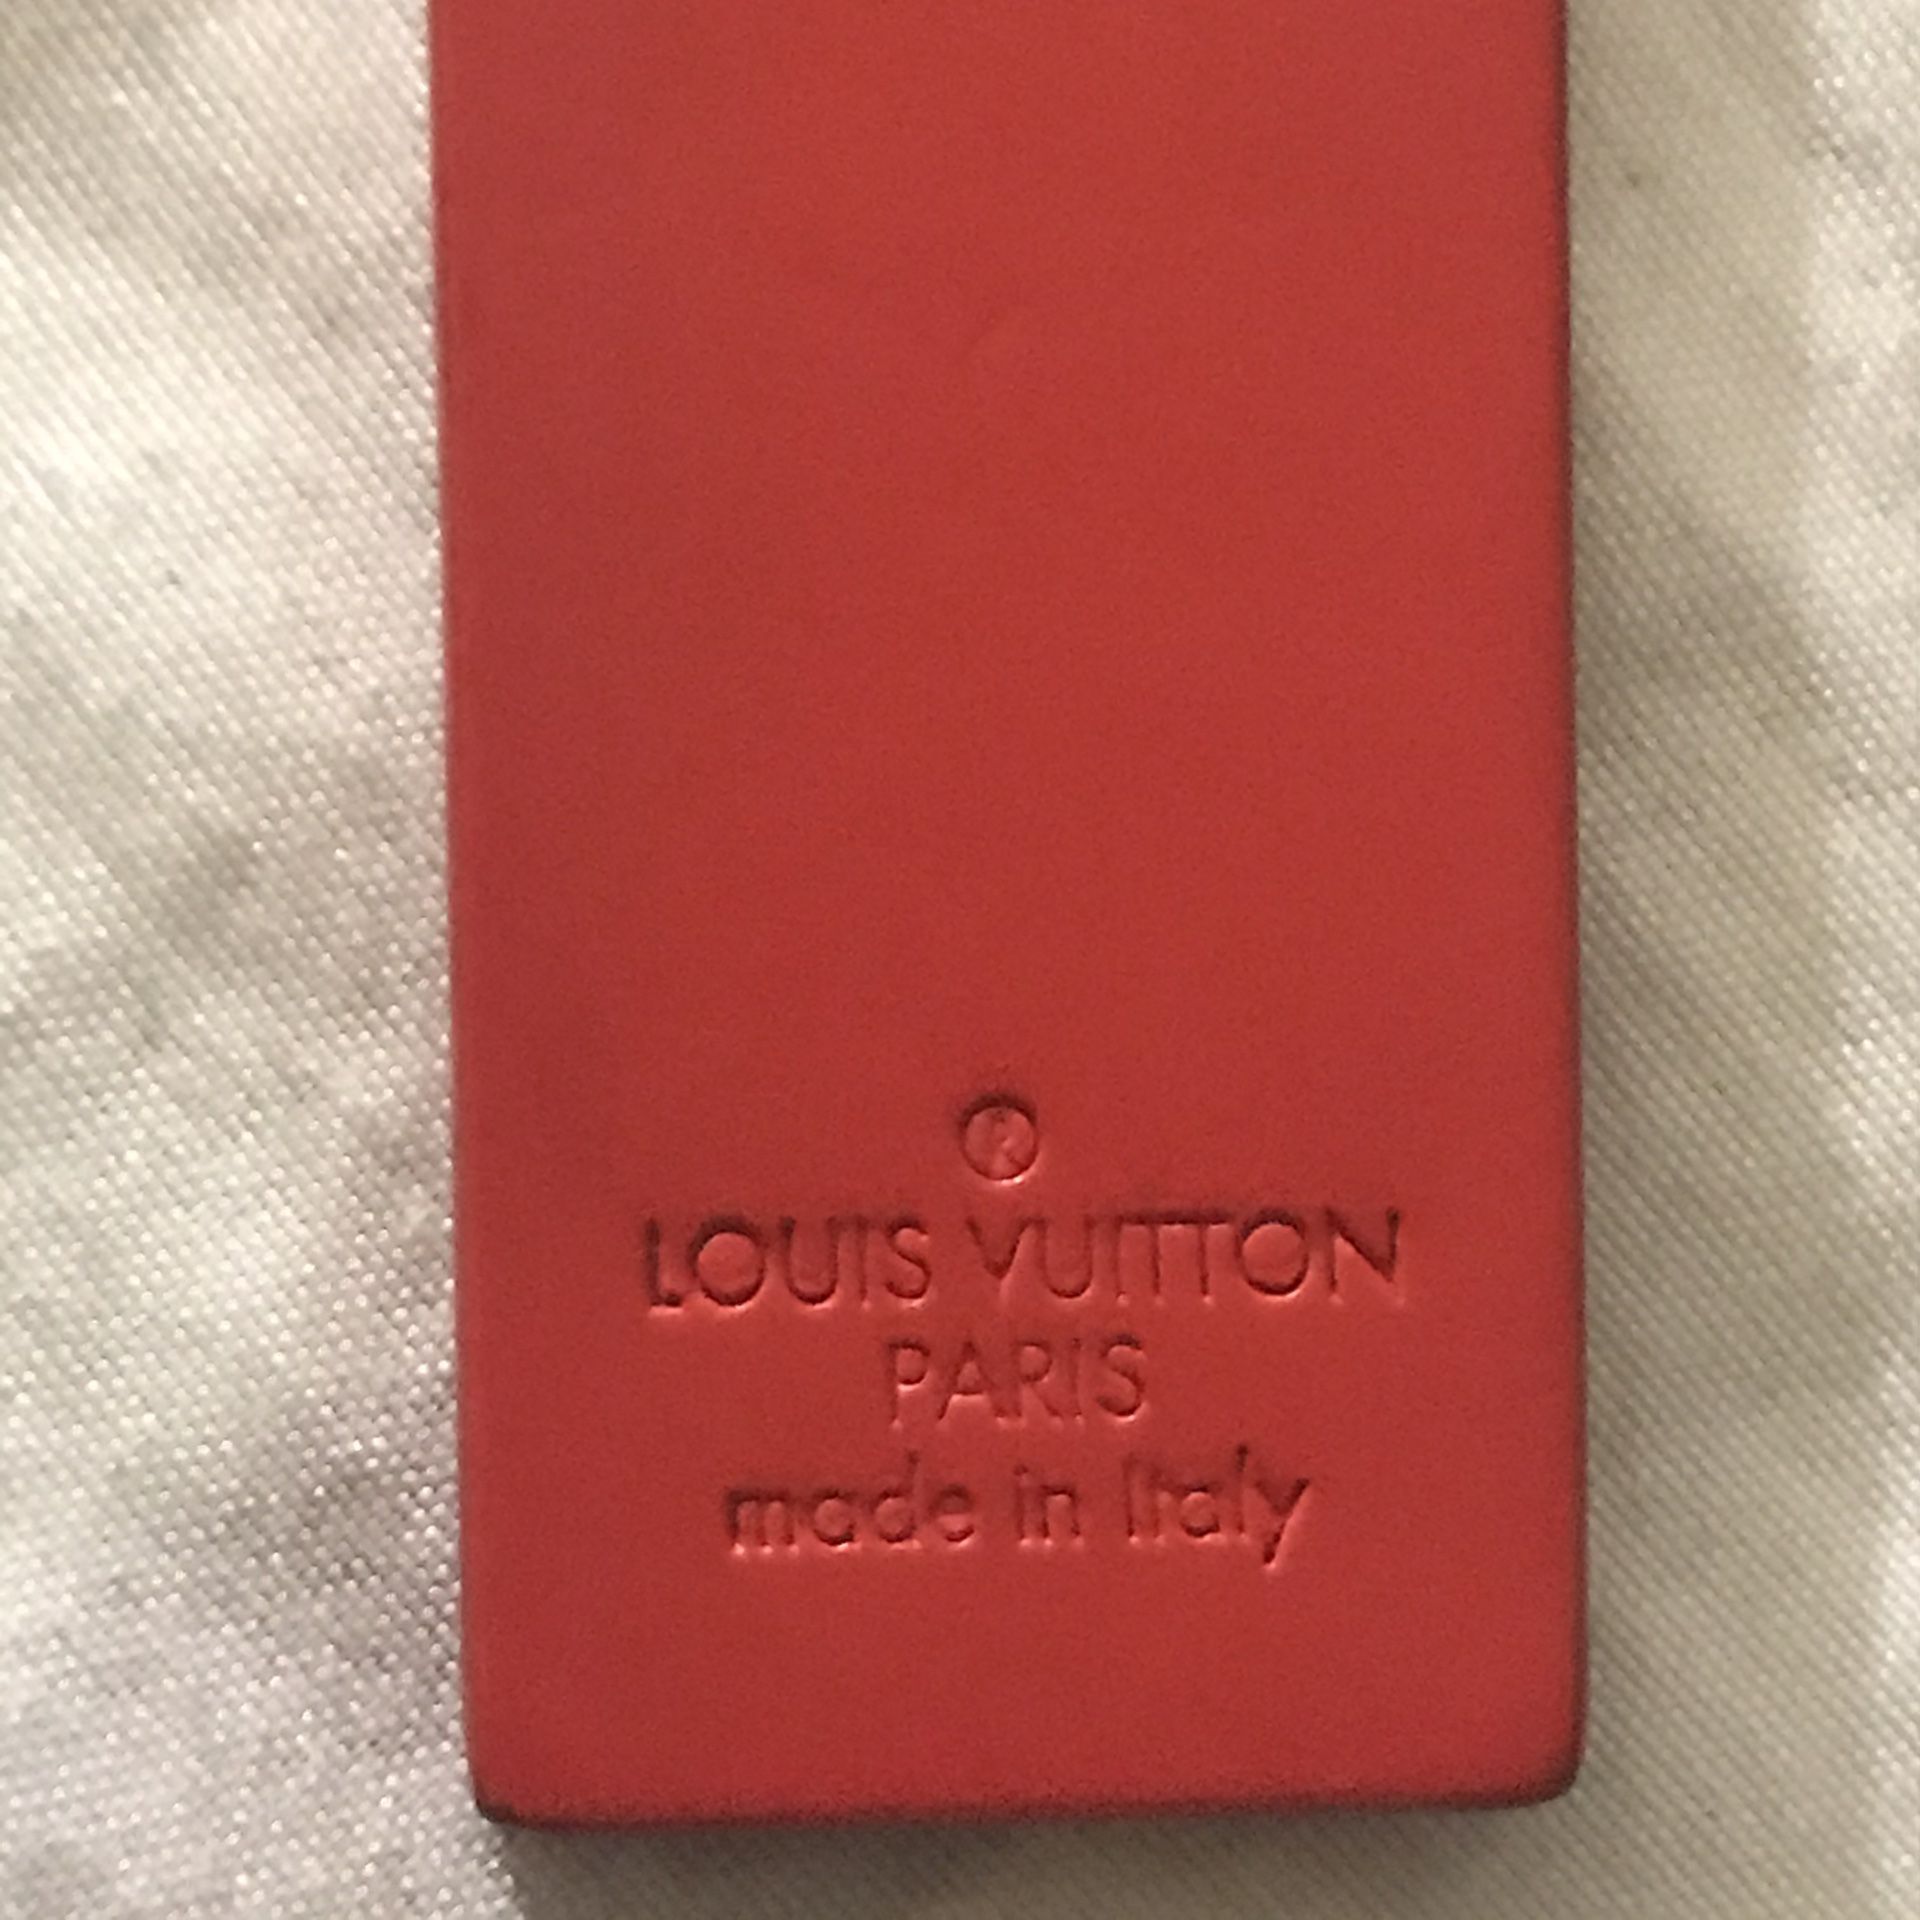 Louis Vuitton Keychain Dog for Sale in Las Vegas, NV - OfferUp